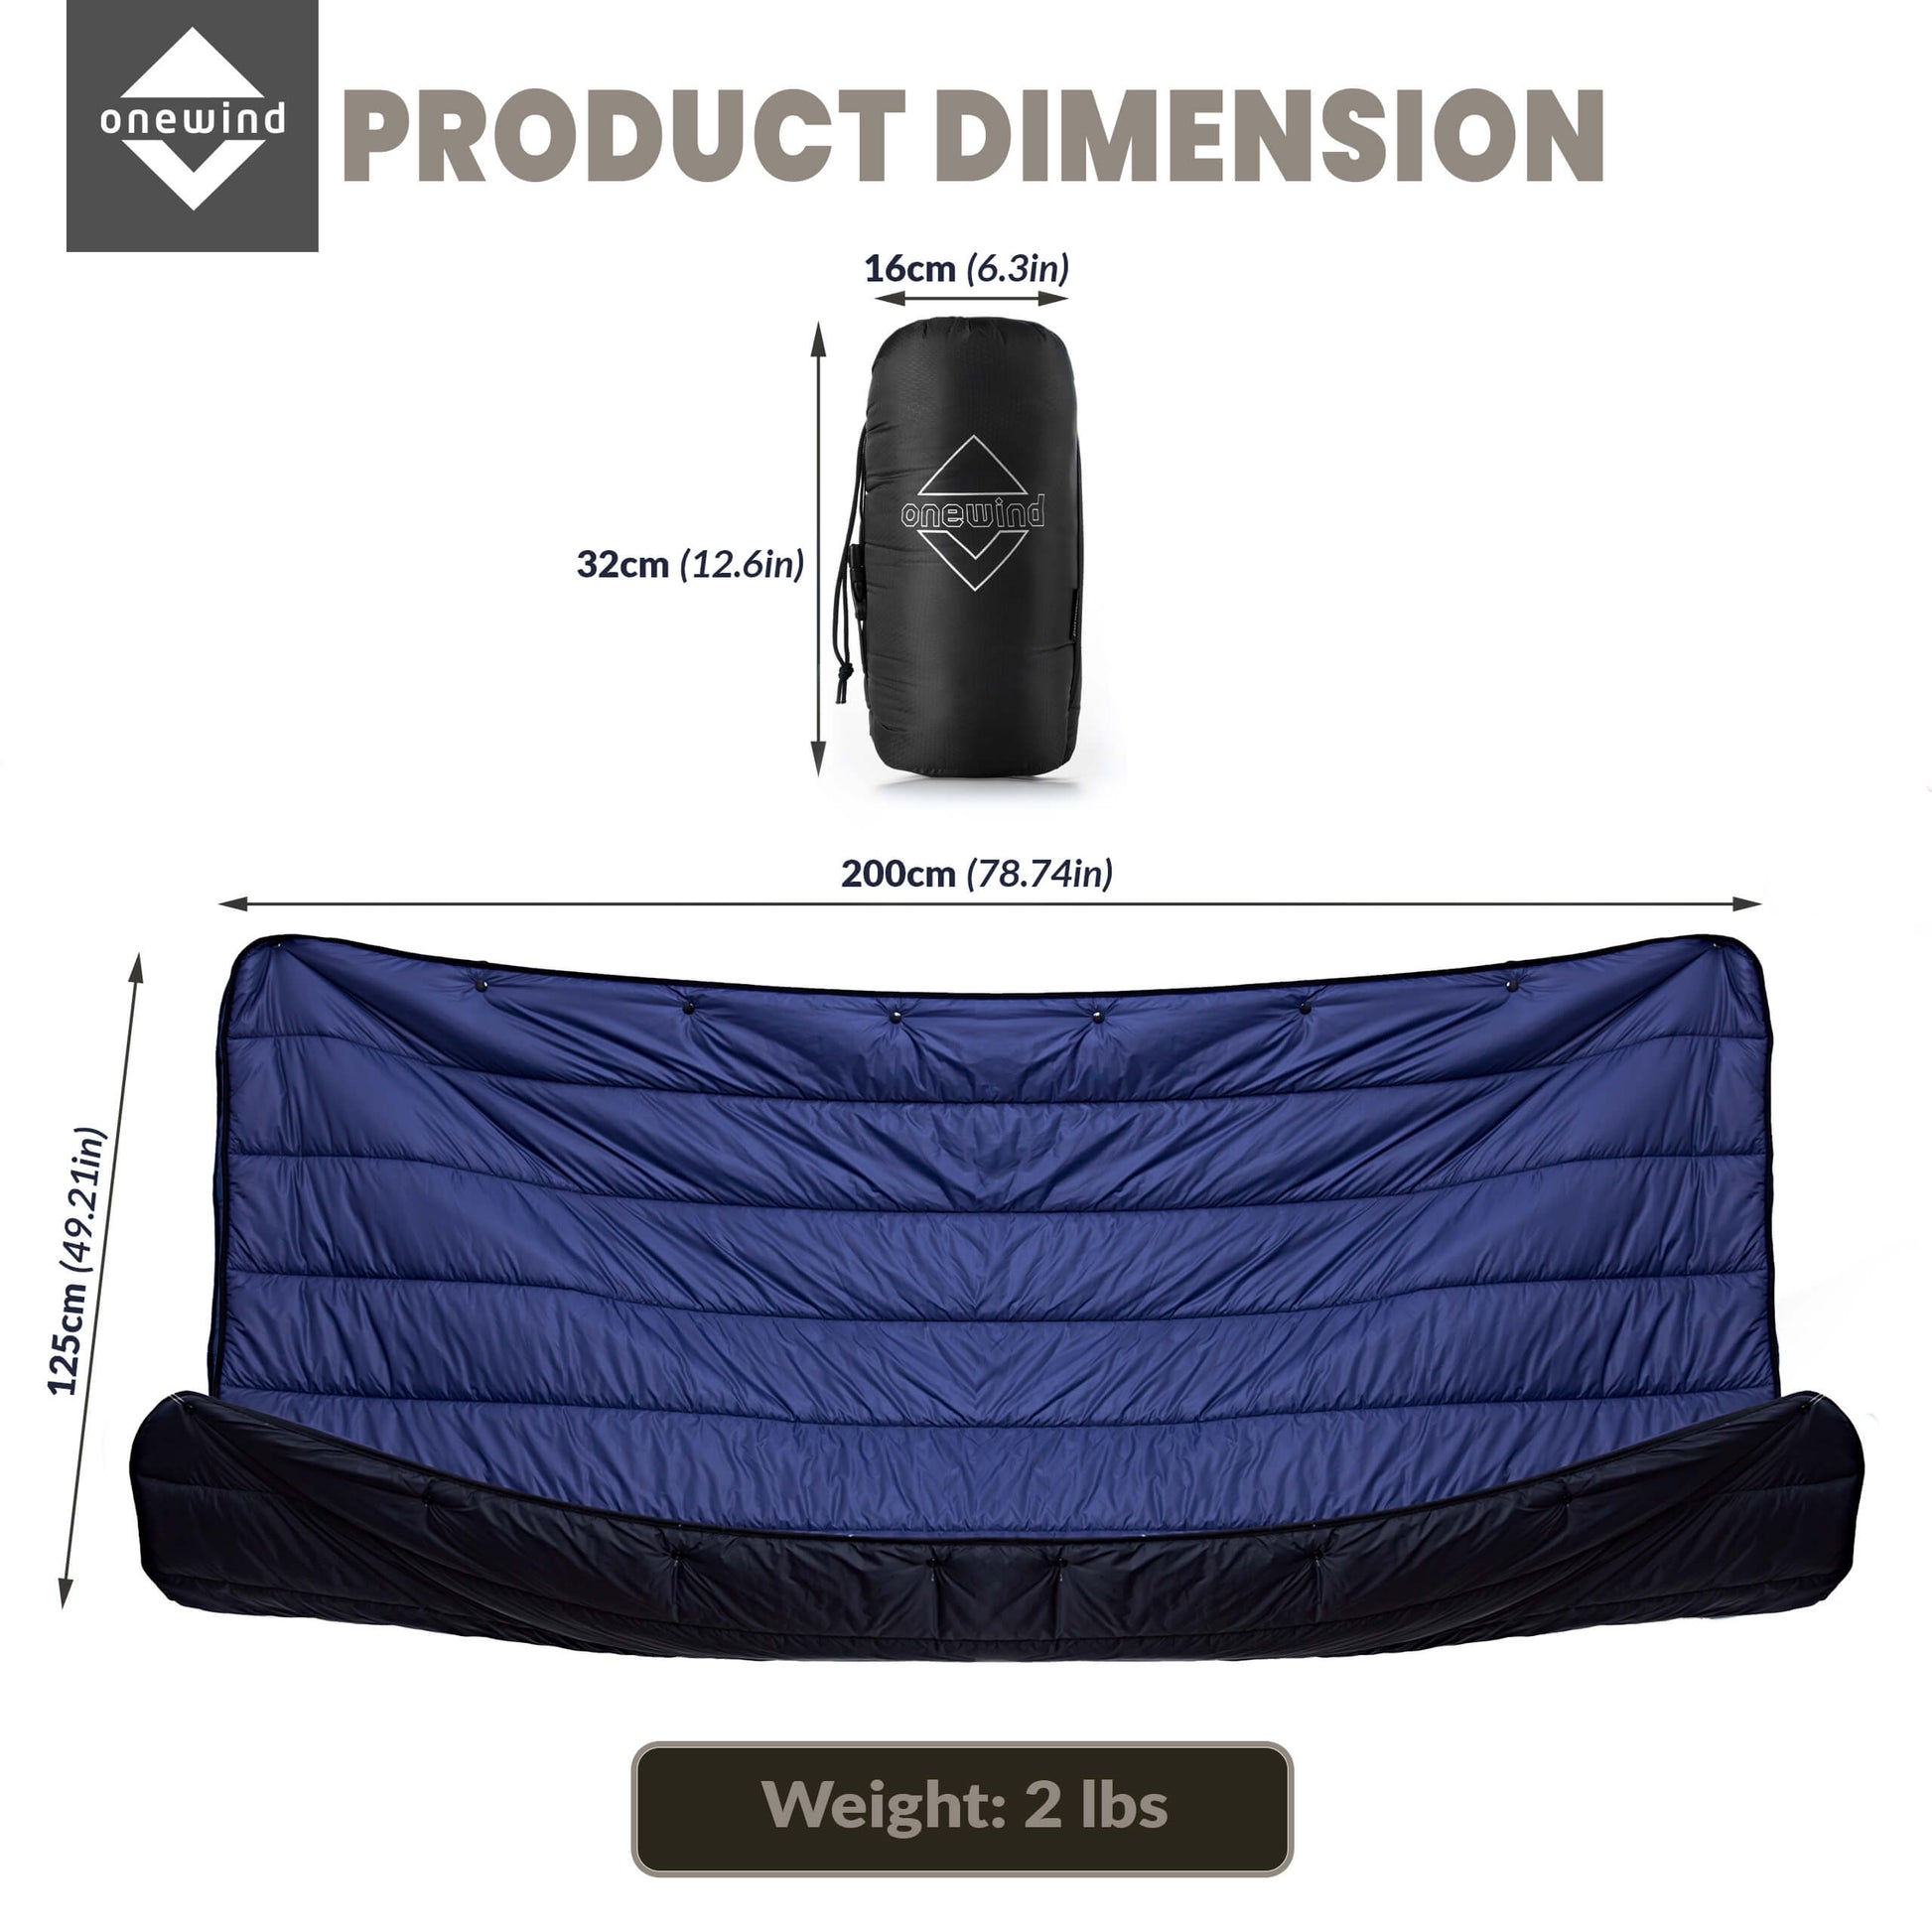 Camping Blanket Lightweight | Onewind Outdoors